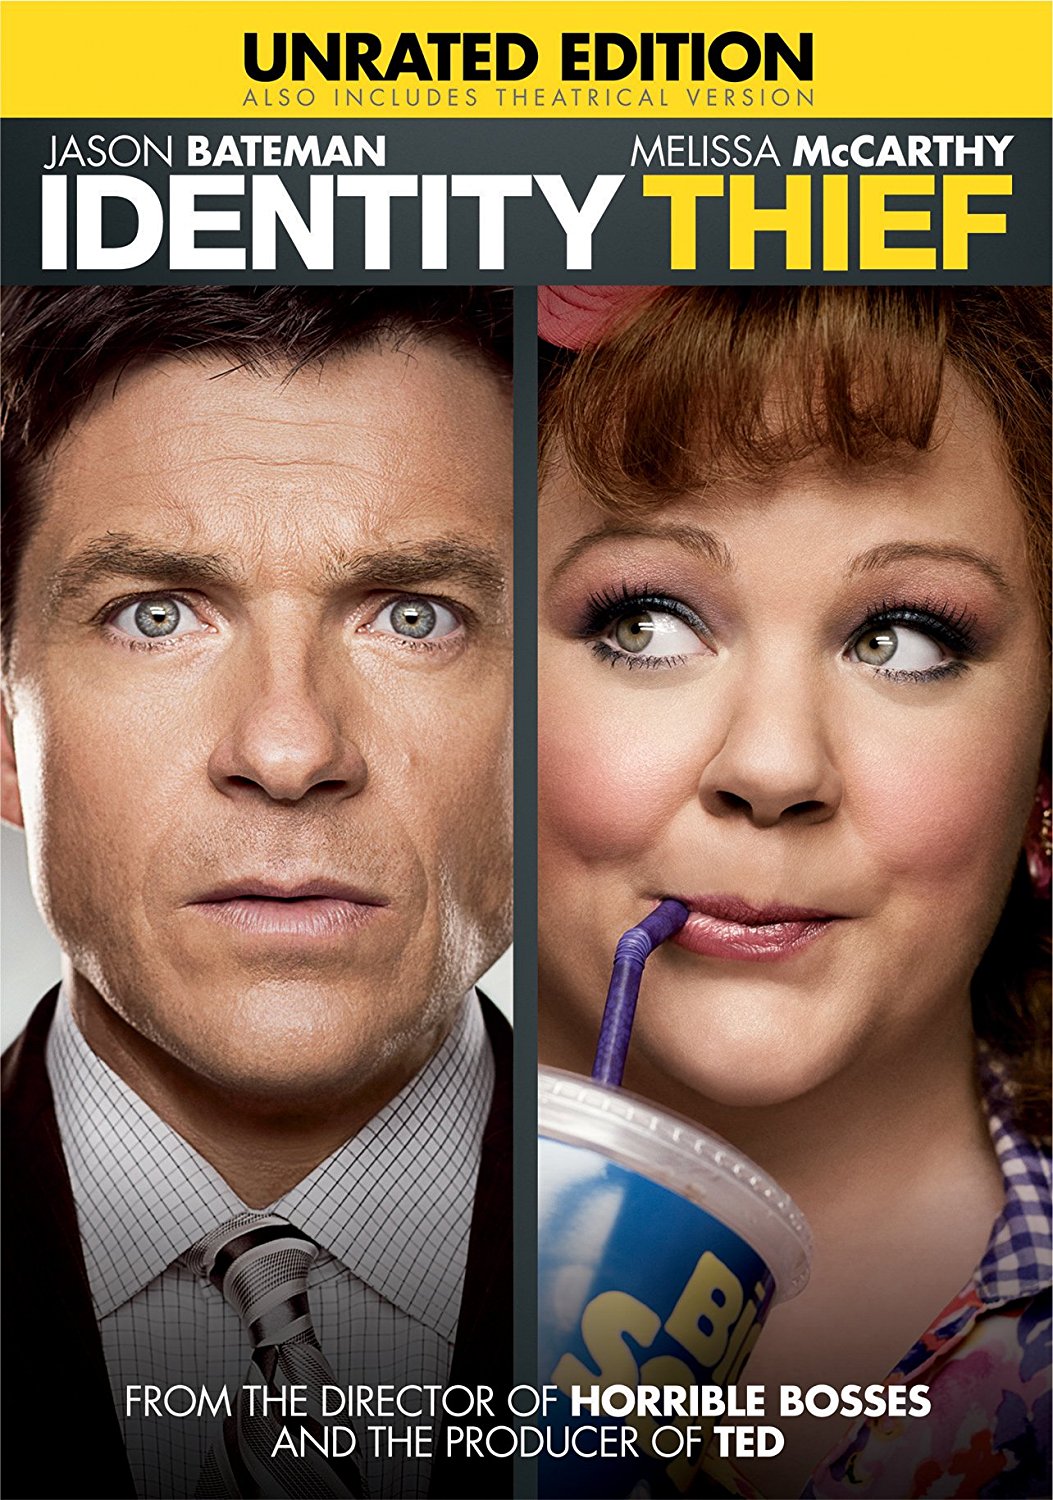 Identity Thief (Unrated) (DVD), Universal Studios, Comedy - image 5 of 5